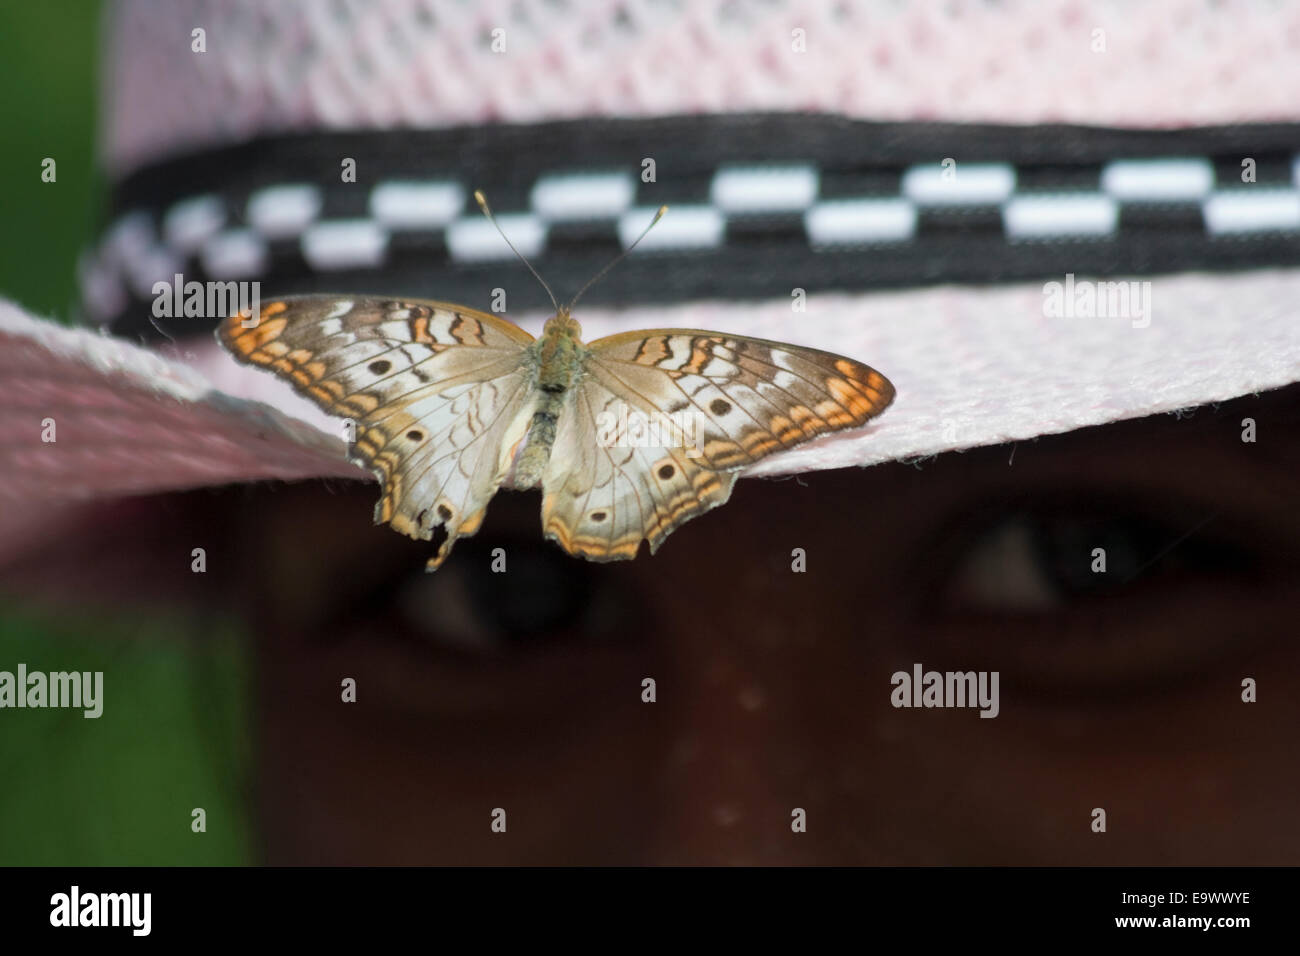 The Meadow Argus Butterfly (Junonia villida) on the girls hat Stock Photo